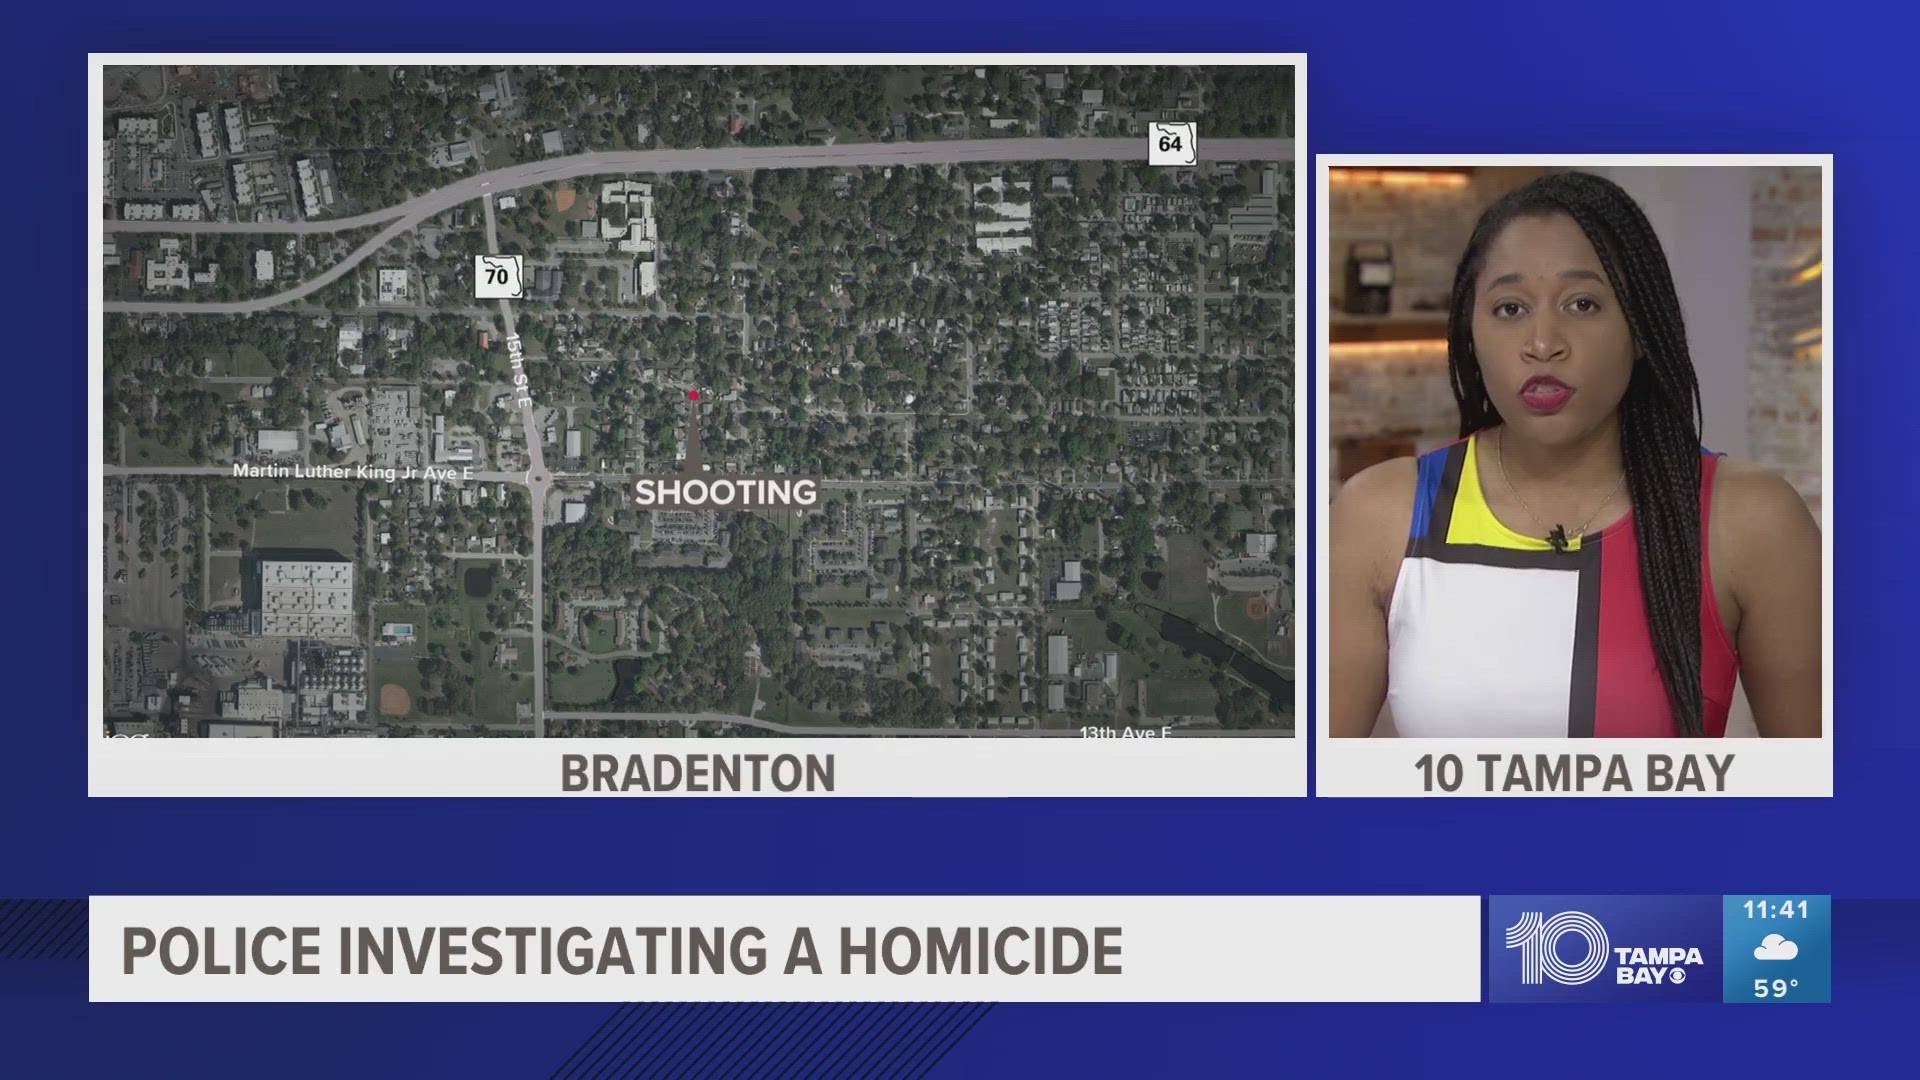 Authorities say the investigation of the murder is still in the early stages.